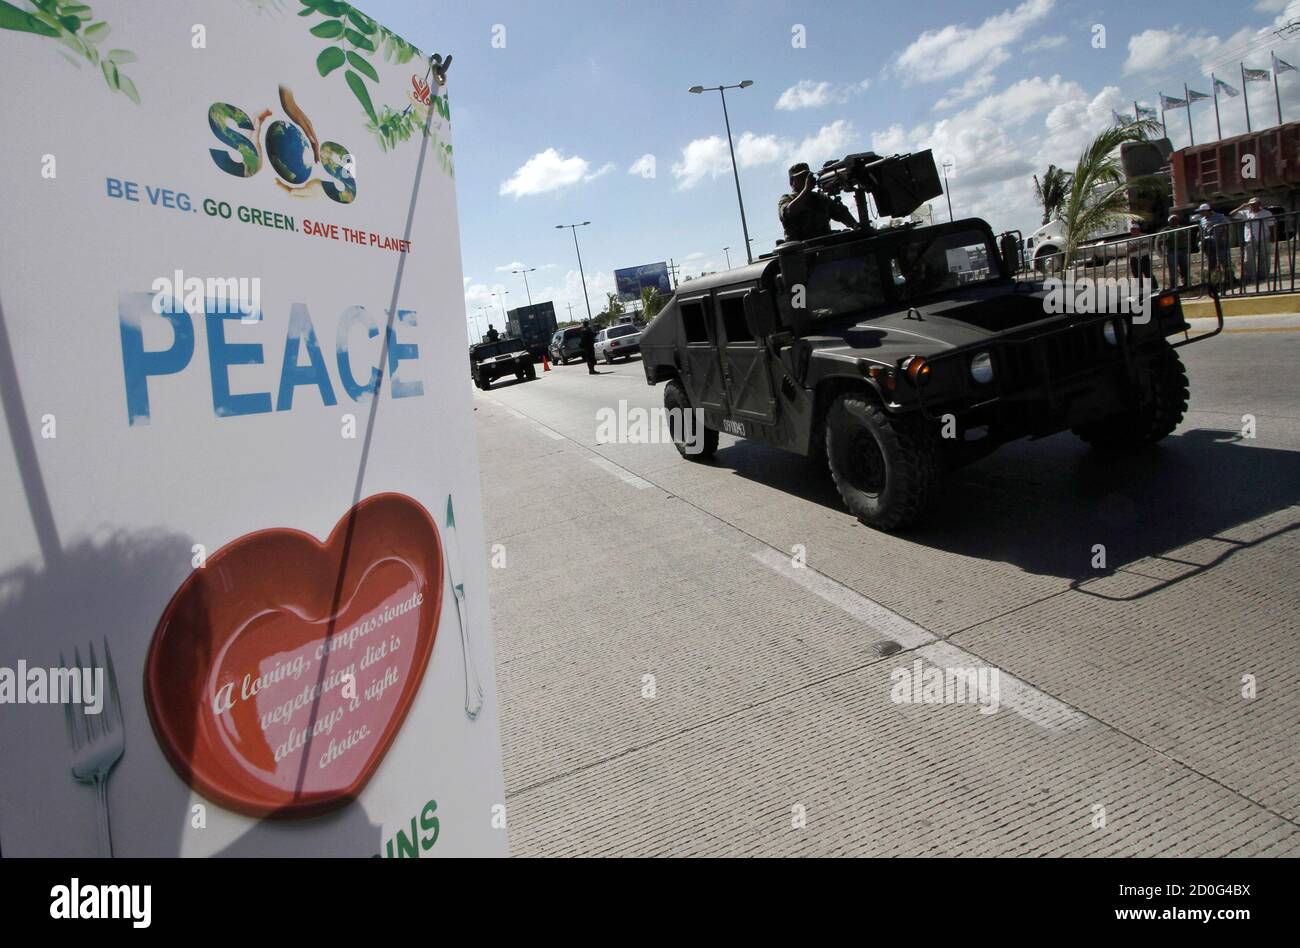 Soldiers lead a convoy of armoured personnel carriers while patrolling the area surrounding the venue of climate talks in Cancun November 29, 2010. U.N. climate talks with almost 200 nations are starting in Cancun on Monday to discuss steps to combat climate change after a summit in Denmark in 2009 came up with only a non-binding Copenhagen Accord.  REUTERS/Gerardo Garcia (MEXICO - Tags: ENVIRONMENT MILITARY) Stock Photo